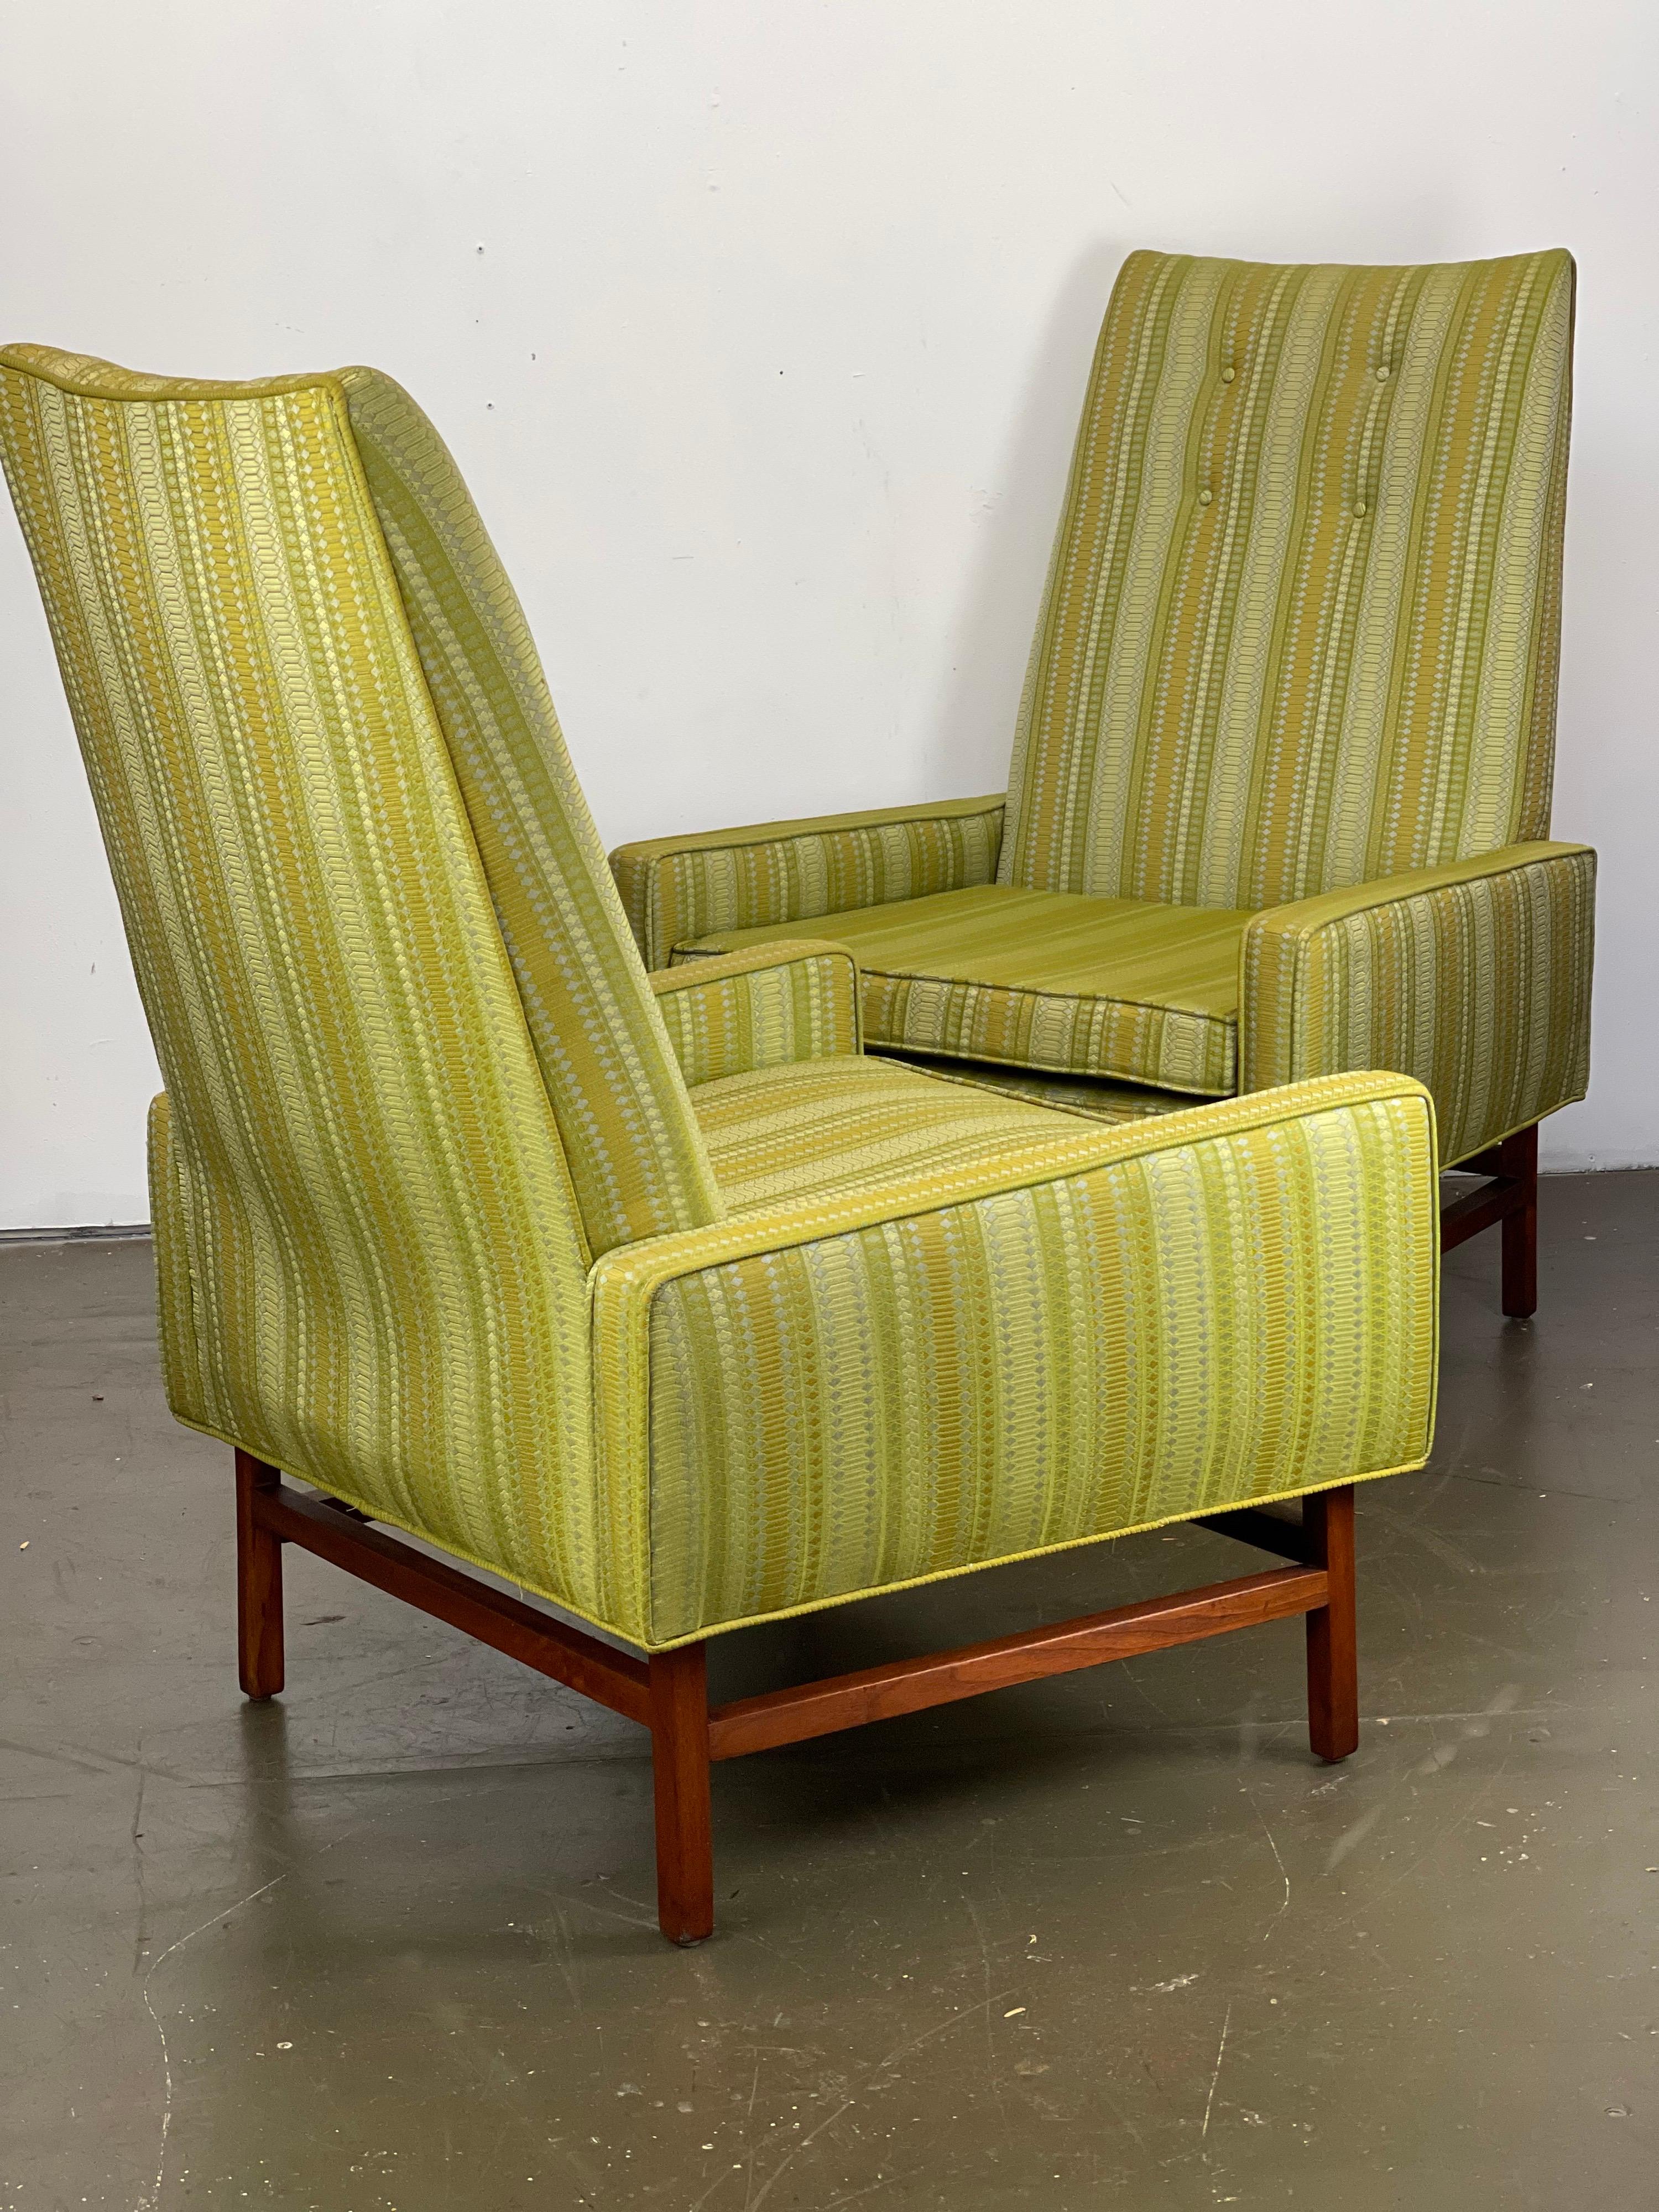 Throne Chairs in Alexander Girard Fabric by Edward Axel Roffman for B. Altman's  1